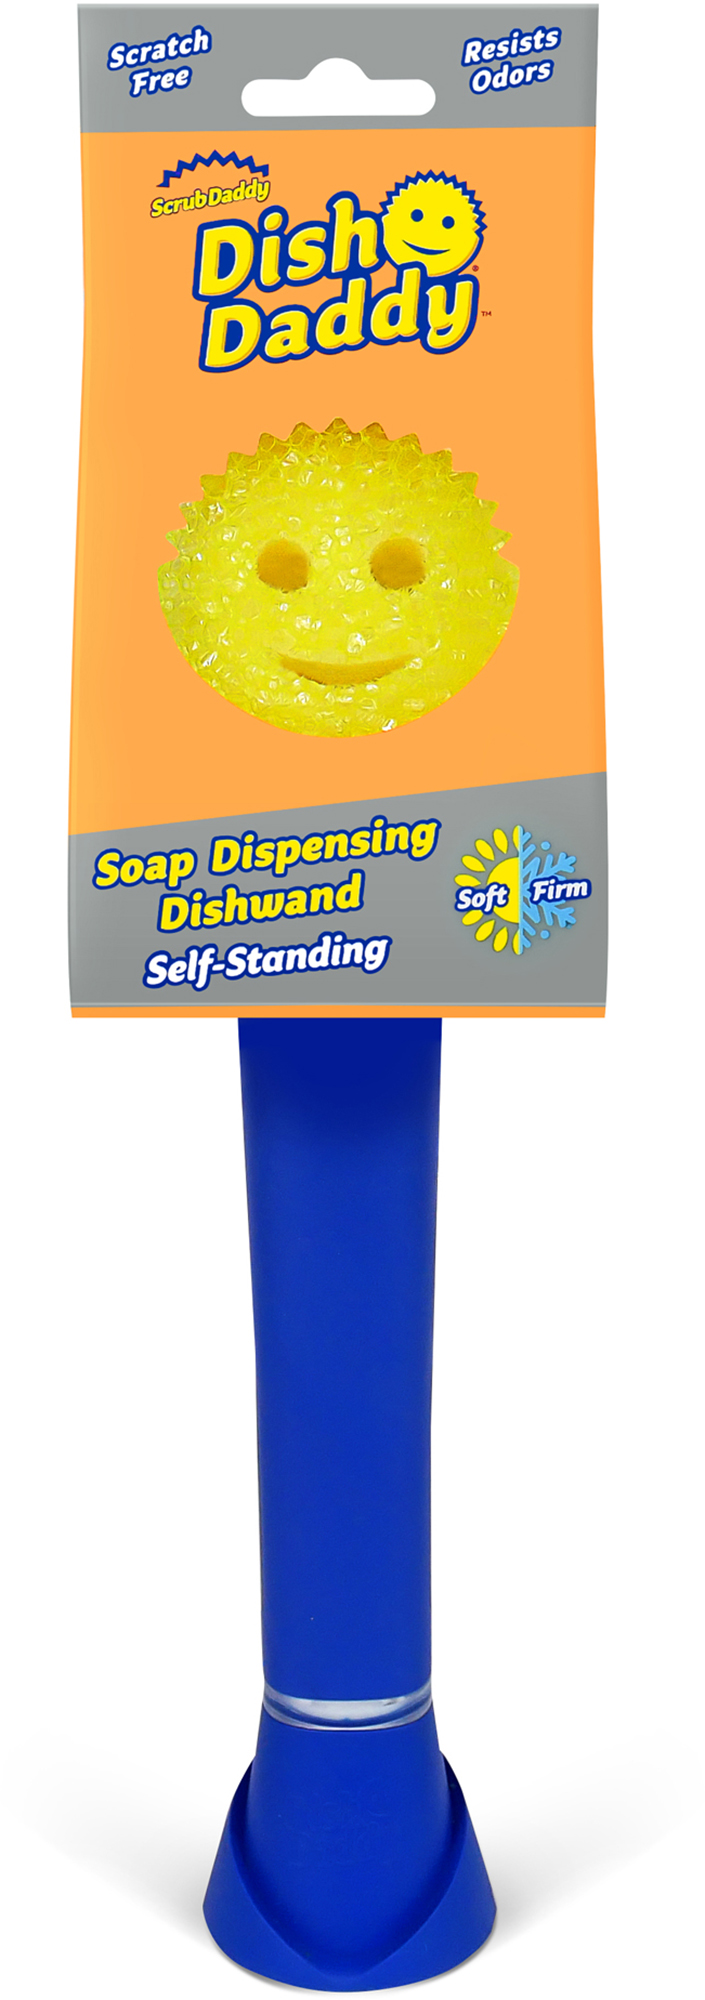 Scrub Daddy Dish Daddy Dish Wand, Soap Dispensing Dish Brush, Blue & Dish  Daddy Dish Wand Replacement Head Refill, Compatible with Soap Dispensing